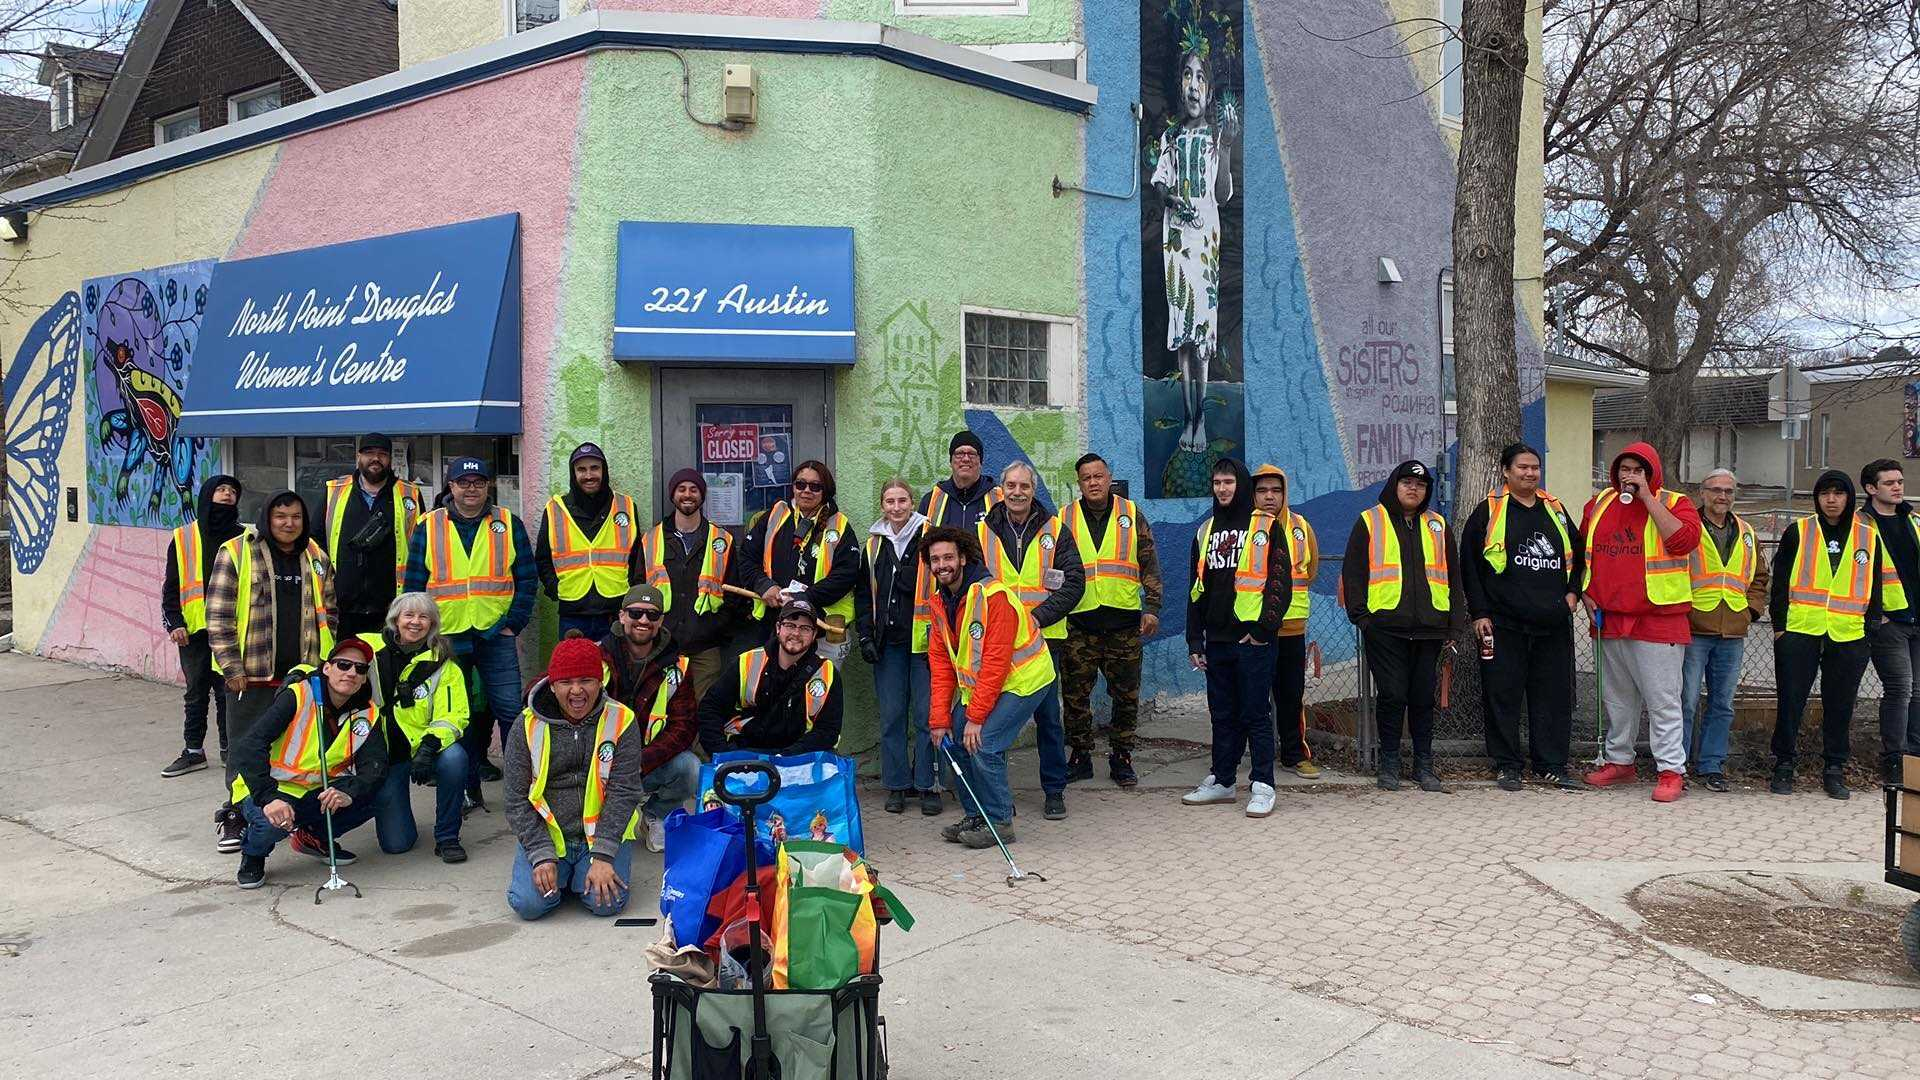 Horizontal photo of about 25 people in neon yellow vests standing in a line outside the North Point Douglas Woomen's Centre before the Sunday patrol